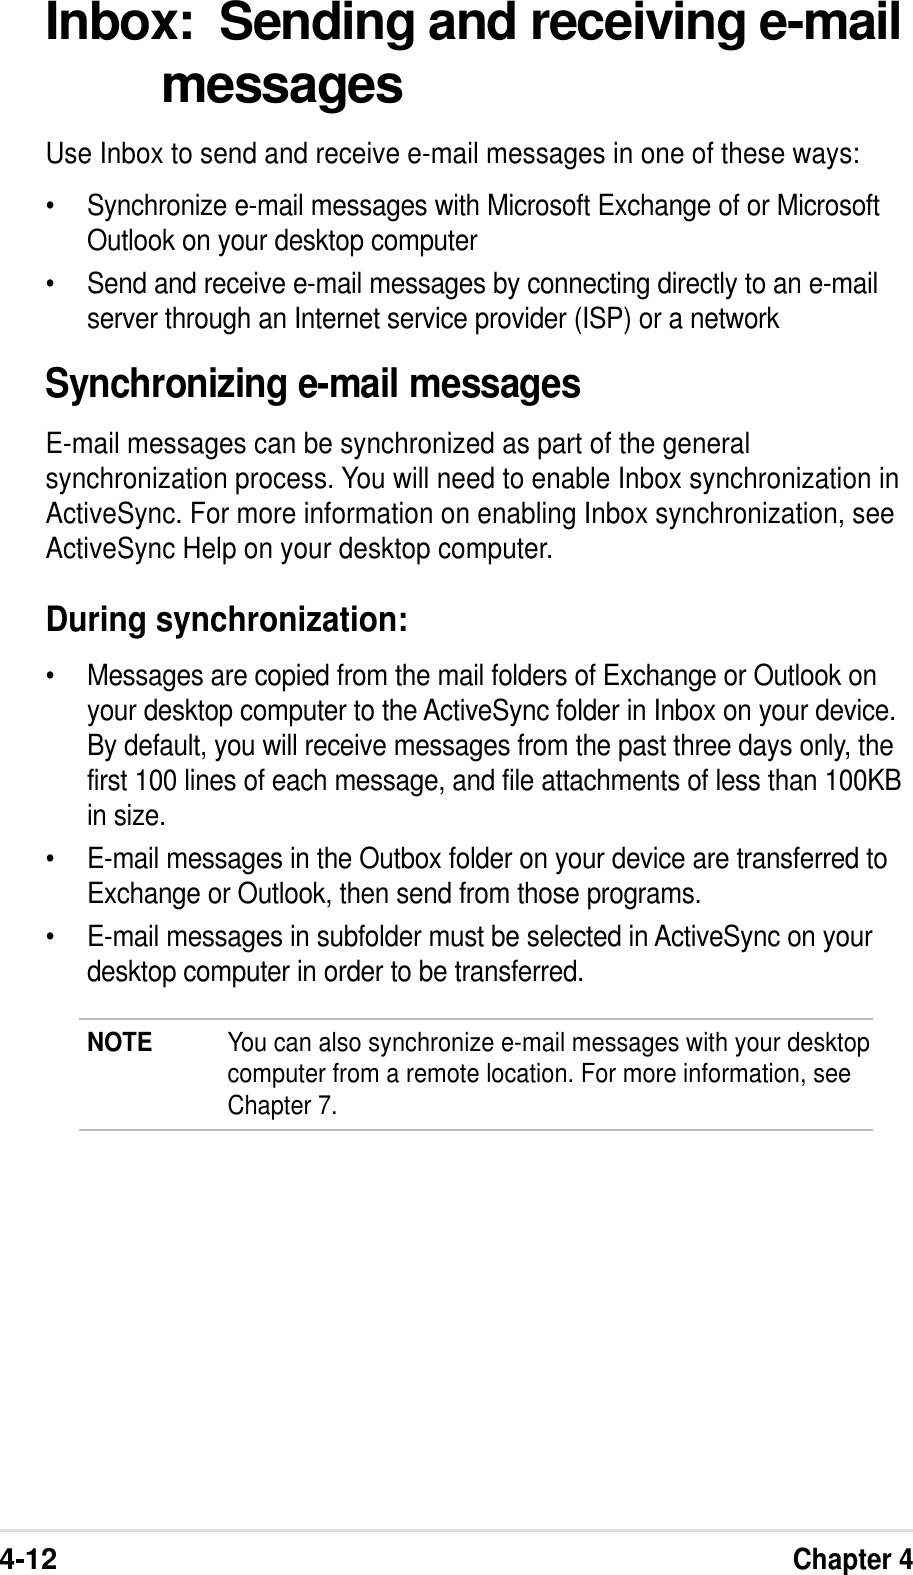 4-12Chapter 4Inbox:  Sending and receiving e-mailmessagesUse Inbox to send and receive e-mail messages in one of these ways:•Synchronize e-mail messages with Microsoft Exchange of or MicrosoftOutlook on your desktop computer•Send and receive e-mail messages by connecting directly to an e-mailserver through an Internet service provider (ISP) or a networkSynchronizing e-mail messagesE-mail messages can be synchronized as part of the generalsynchronization process. You will need to enable Inbox synchronization inActiveSync. For more information on enabling Inbox synchronization, seeActiveSync Help on your desktop computer.During synchronization:•Messages are copied from the mail folders of Exchange or Outlook onyour desktop computer to the ActiveSync folder in Inbox on your device.By default, you will receive messages from the past three days only, thefirst 100 lines of each message, and file attachments of less than 100KBin size.•E-mail messages in the Outbox folder on your device are transferred toExchange or Outlook, then send from those programs.•E-mail messages in subfolder must be selected in ActiveSync on yourdesktop computer in order to be transferred.NOTE You can also synchronize e-mail messages with your desktopcomputer from a remote location. For more information, seeChapter 7.